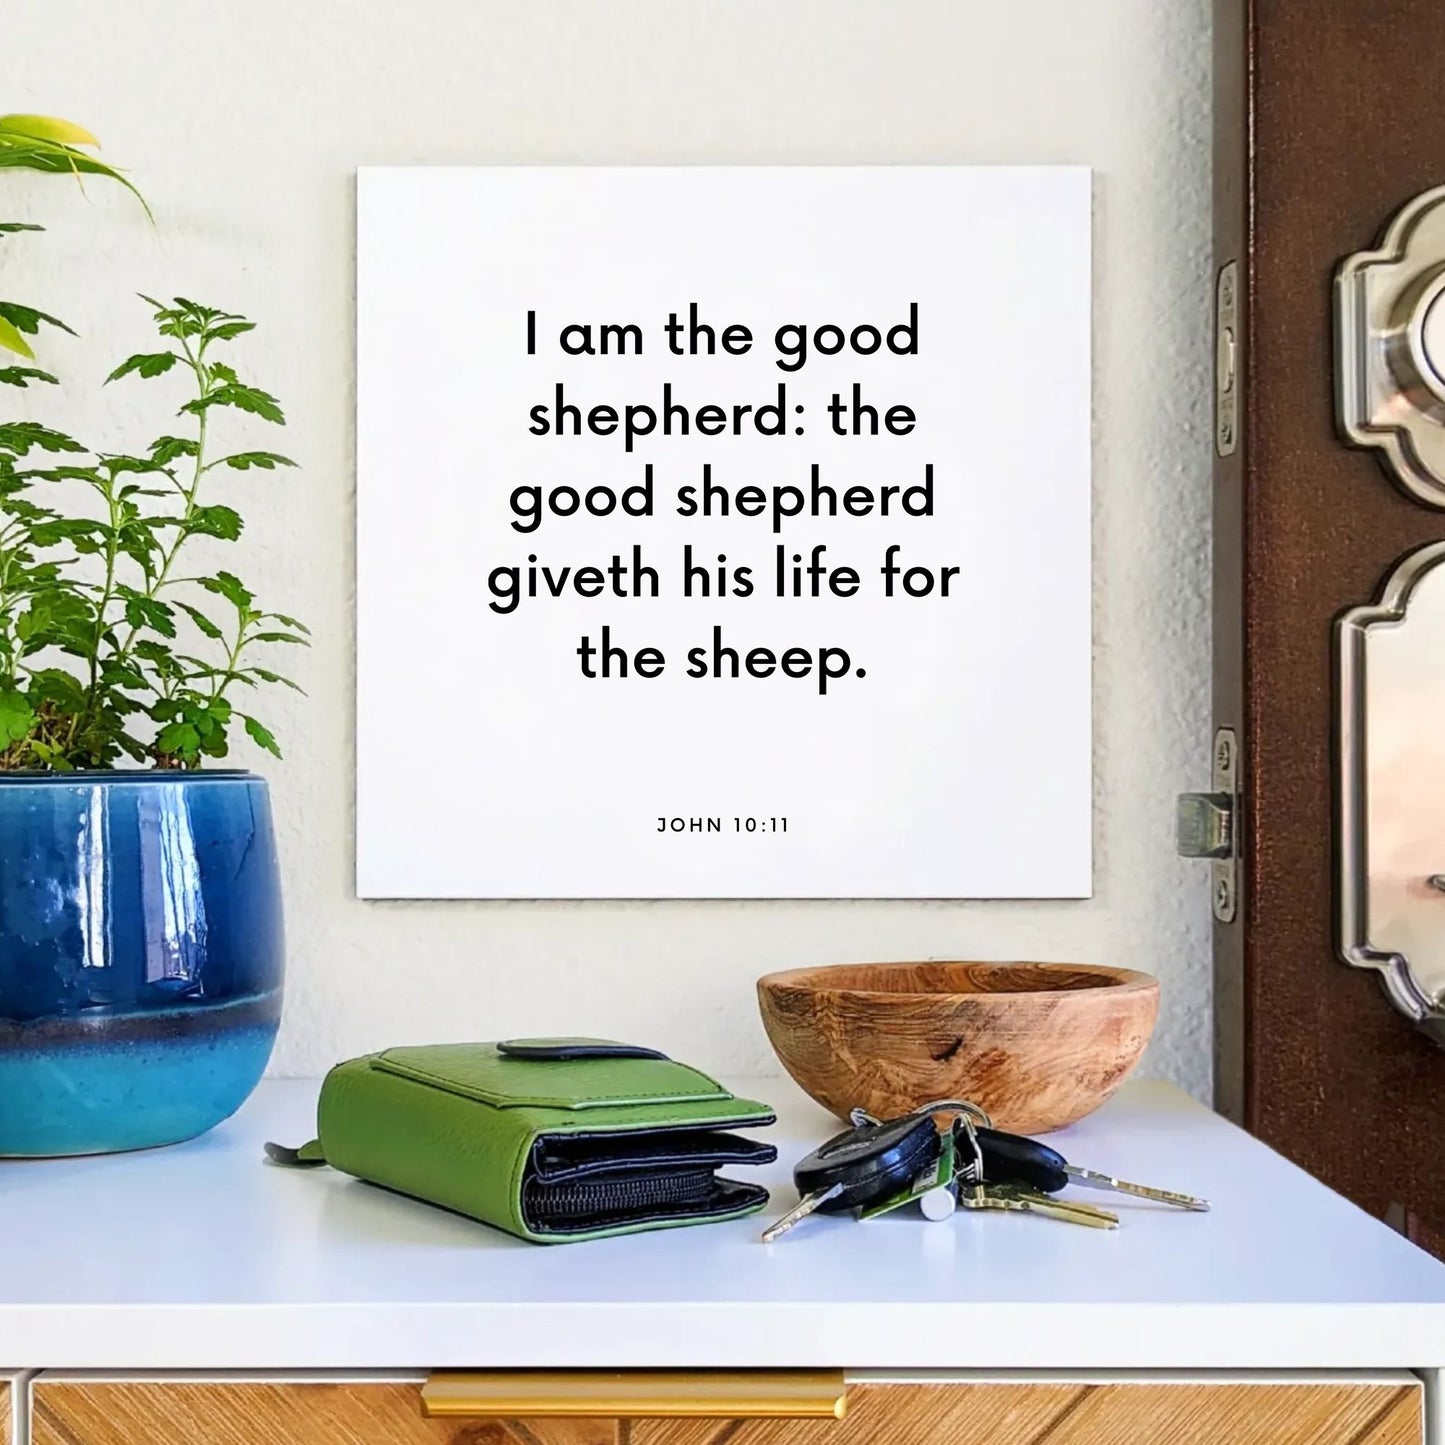 Entryway mouting of the scripture tile for John 10:11 - "The good shepherd giveth his life for the sheep"